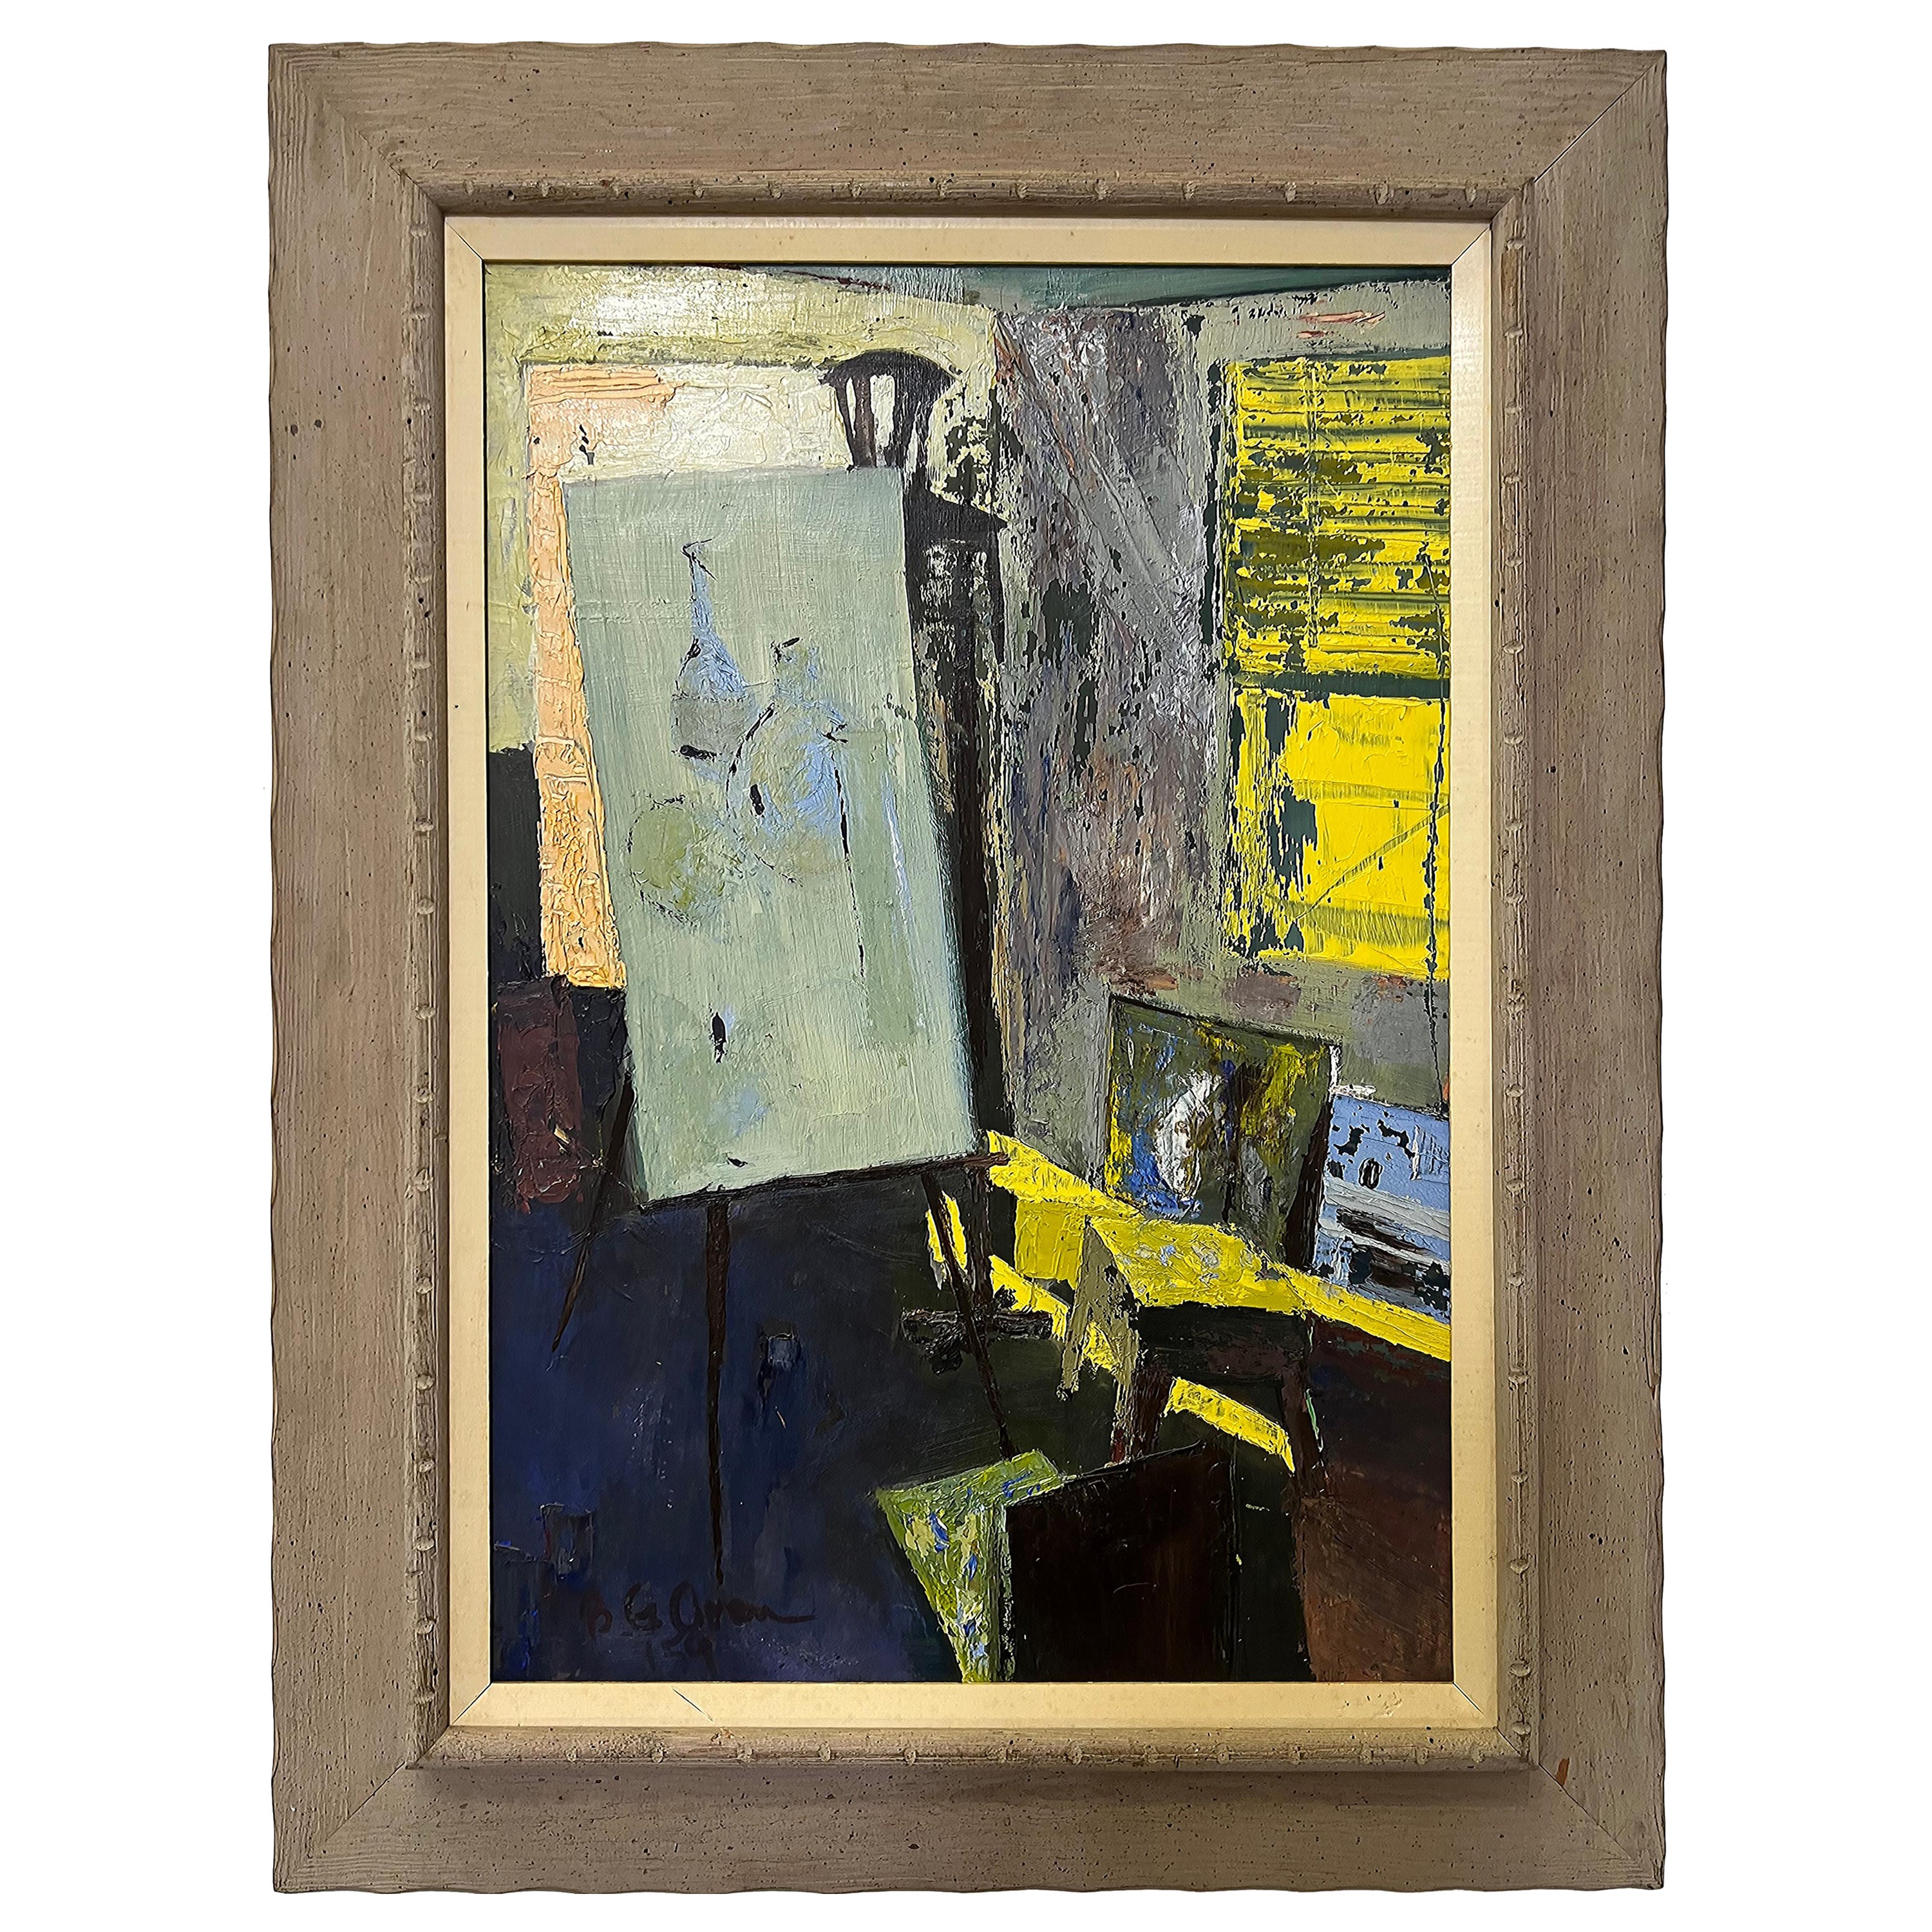 1959 B. G. Orem Mid-century Modern Abstract Oil Painting of His Studio For Sale